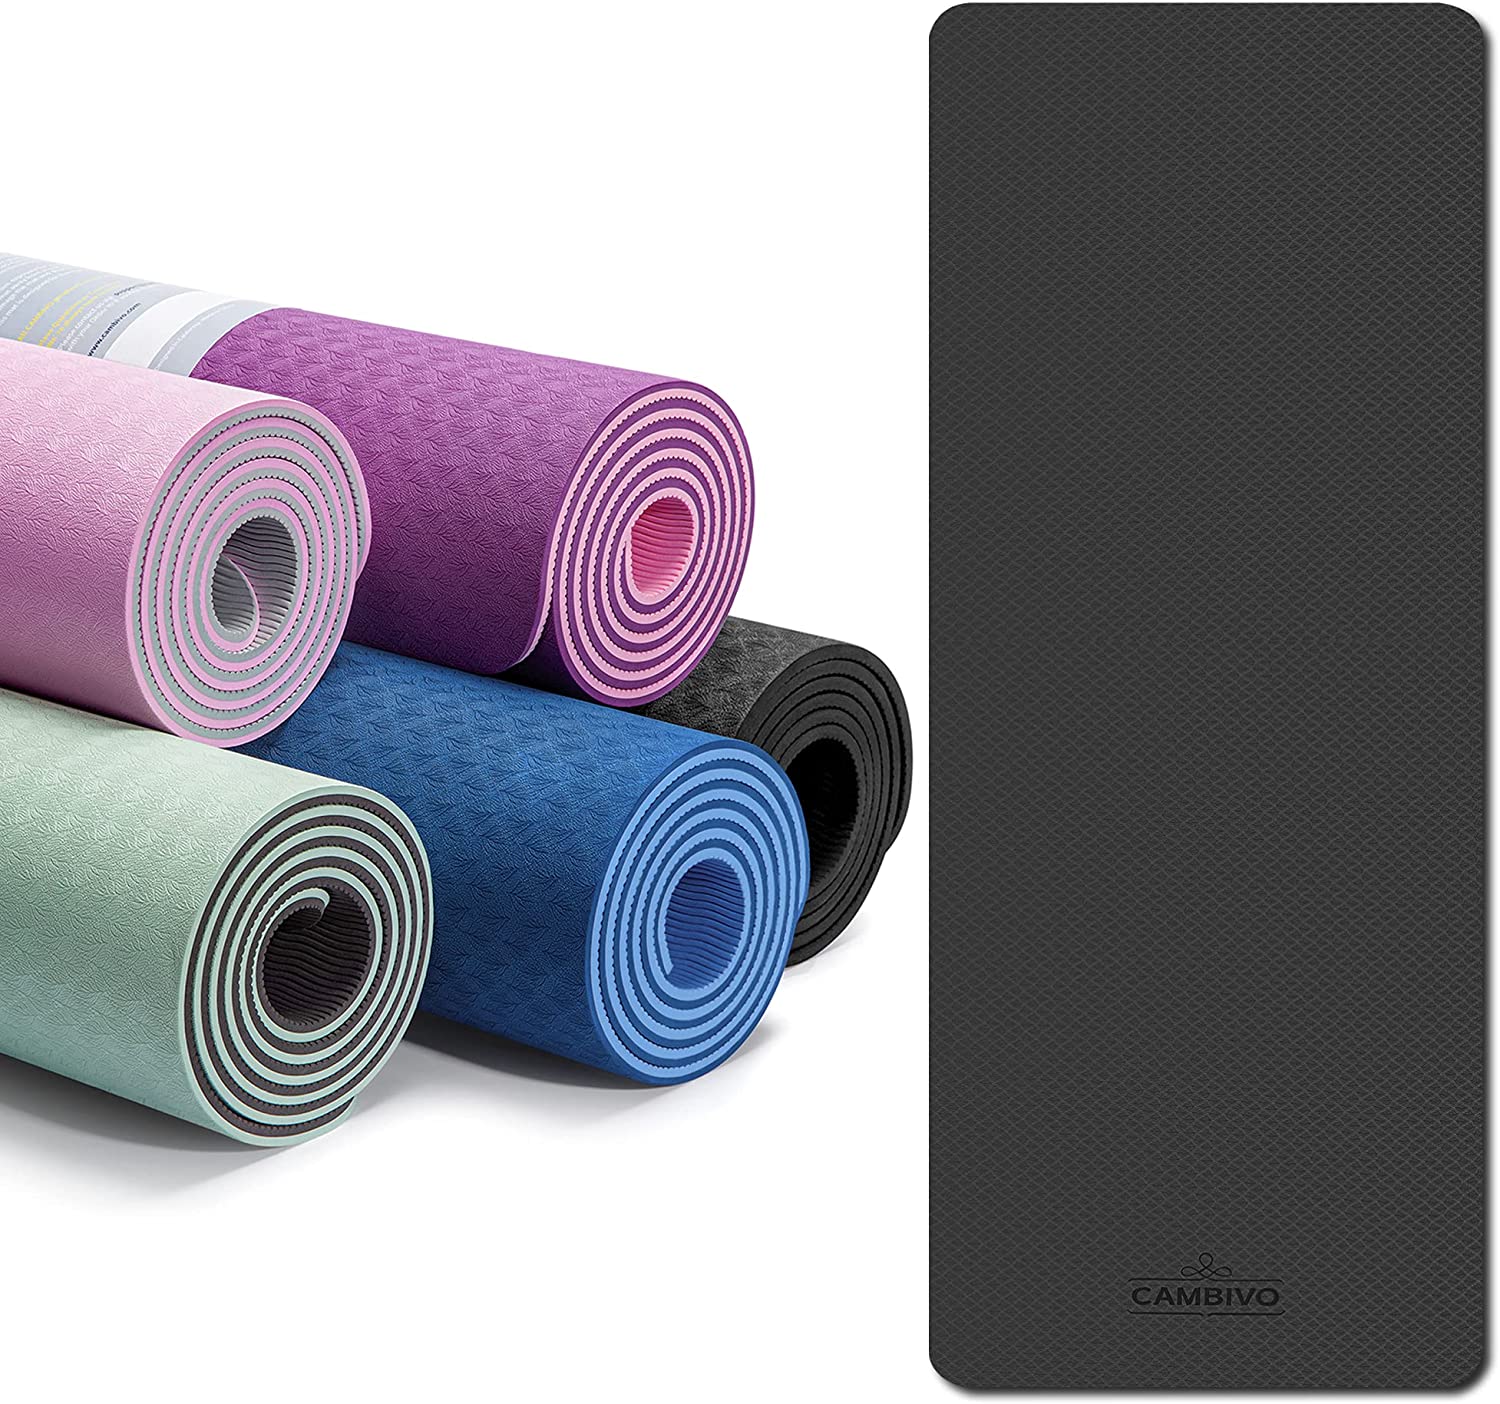 XEOVHVLJ Clearance Small 15 Mm Thick And Durable Yoga Mat Anti